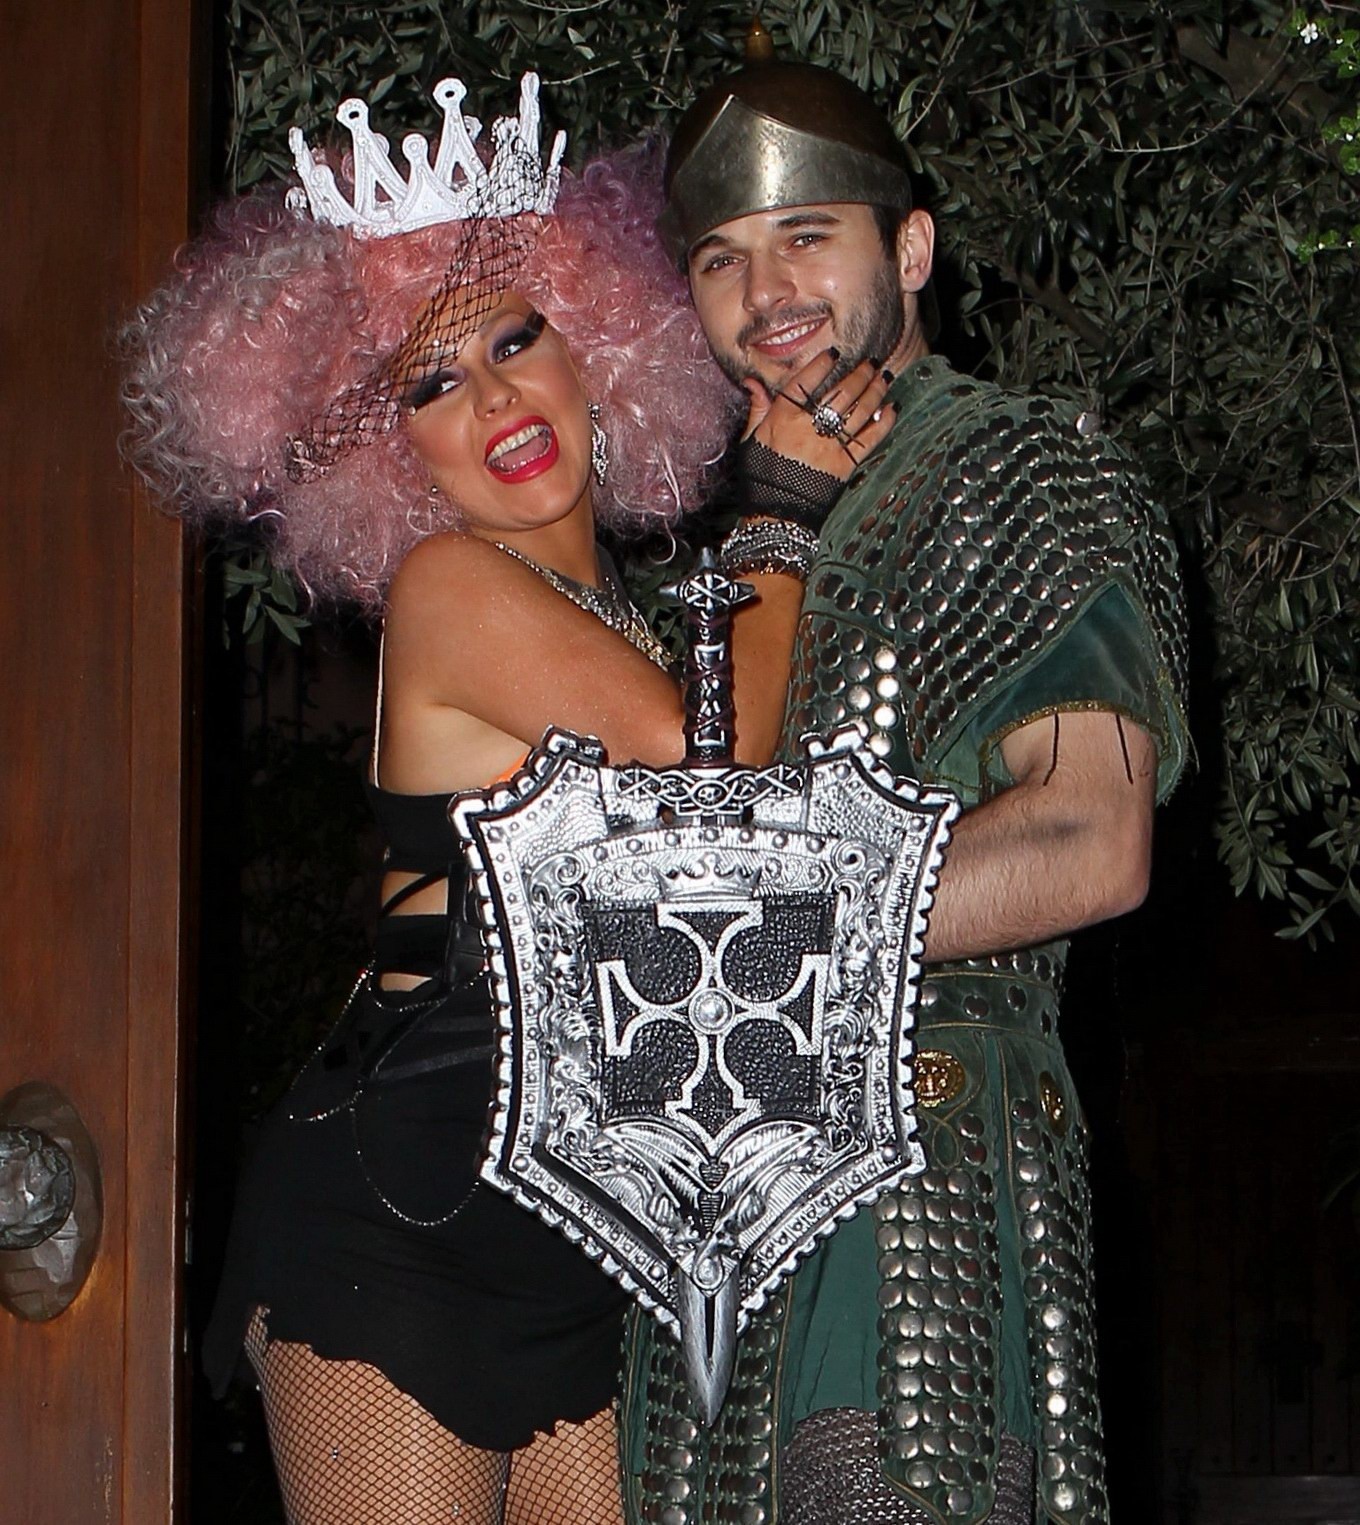 Christina Aguilera in fishnets  fuckme boots hosting a Halloween party at her ho #75249535